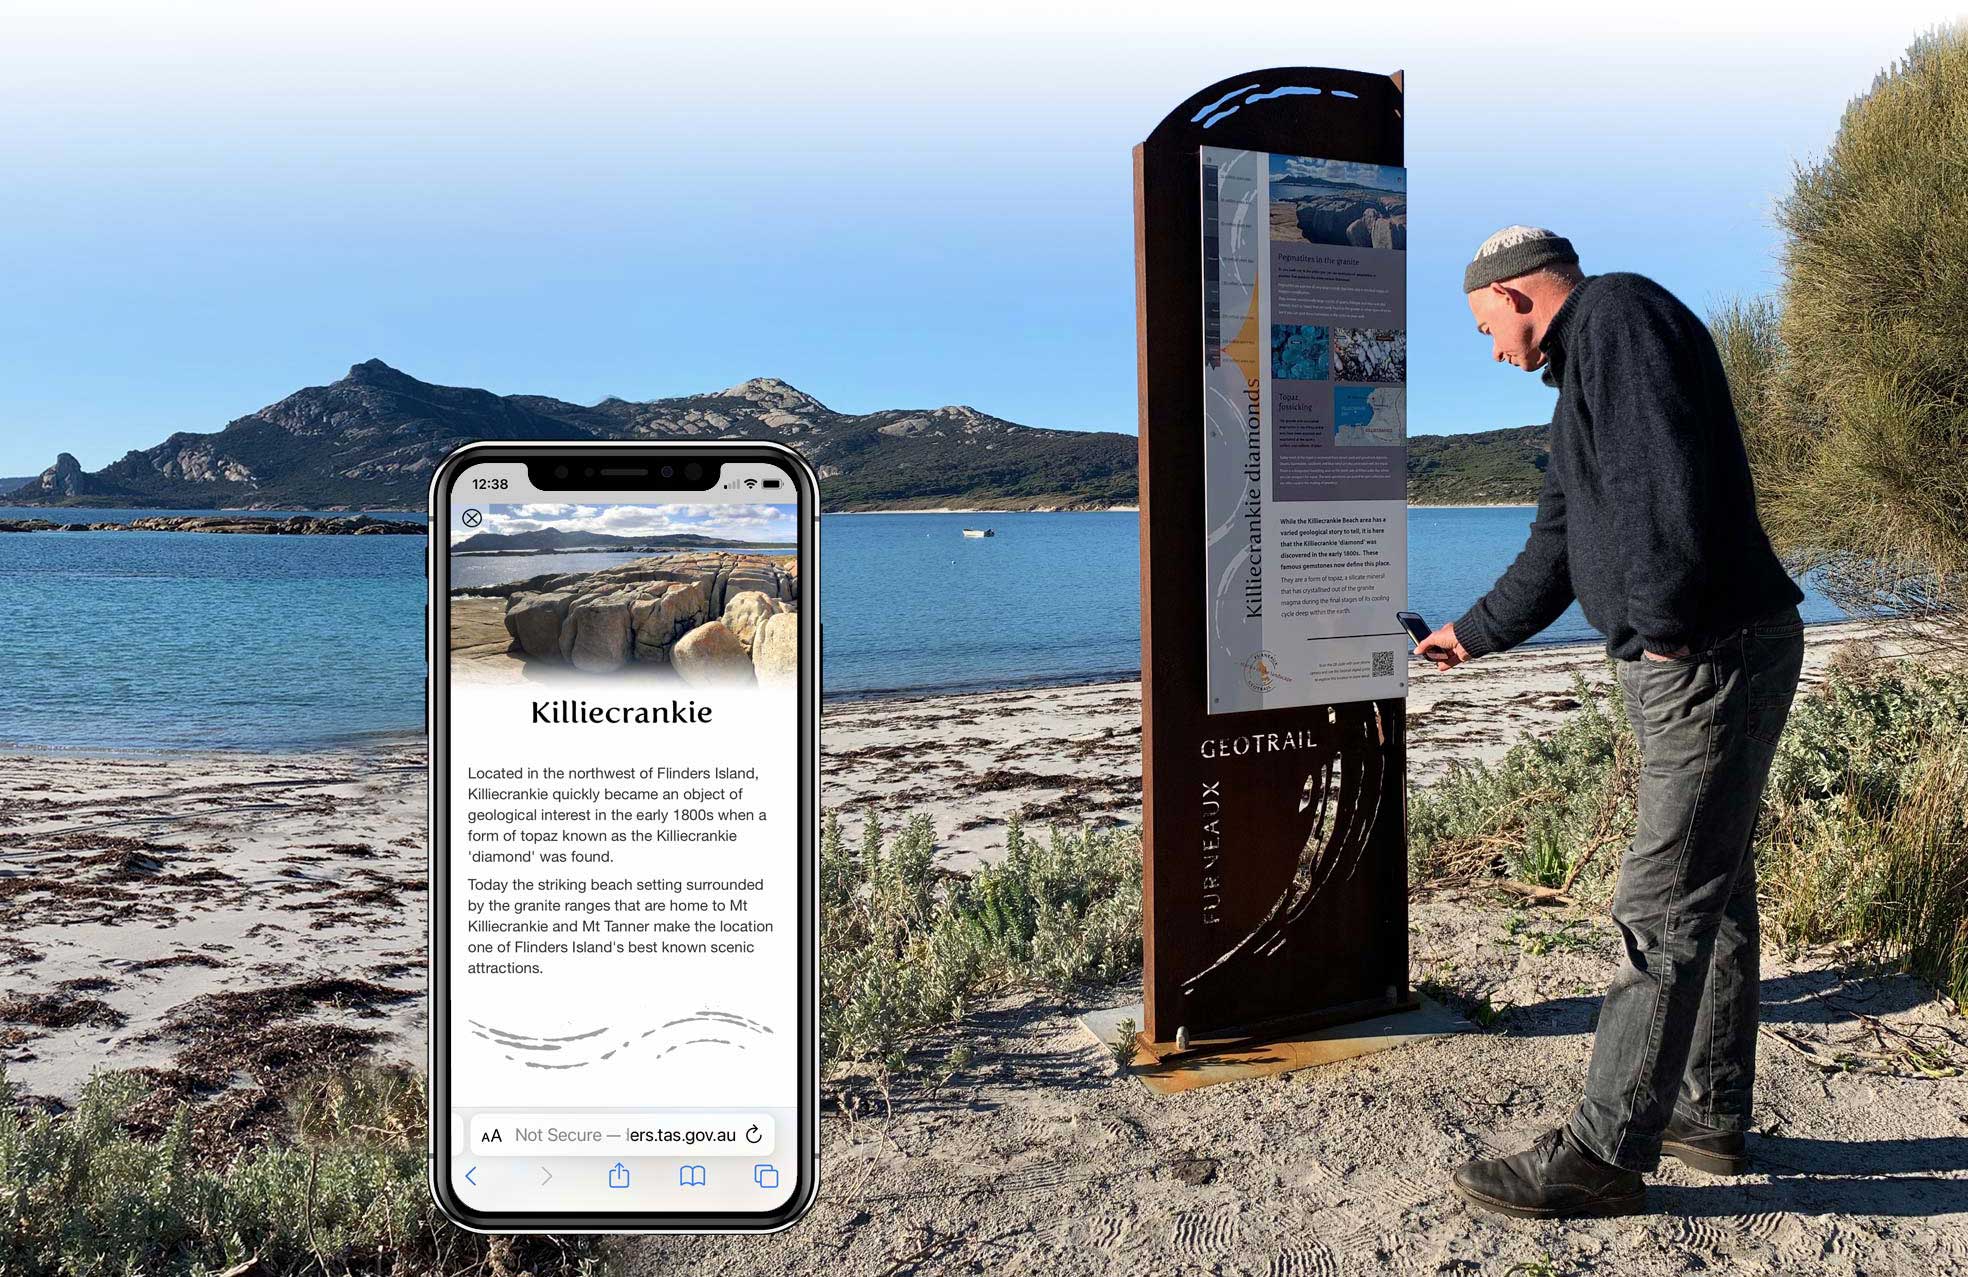 Interpretive signage on the Furneaux Geotrail at Flinders Island is supported by custom web app pages publishing the sign content in HTML 